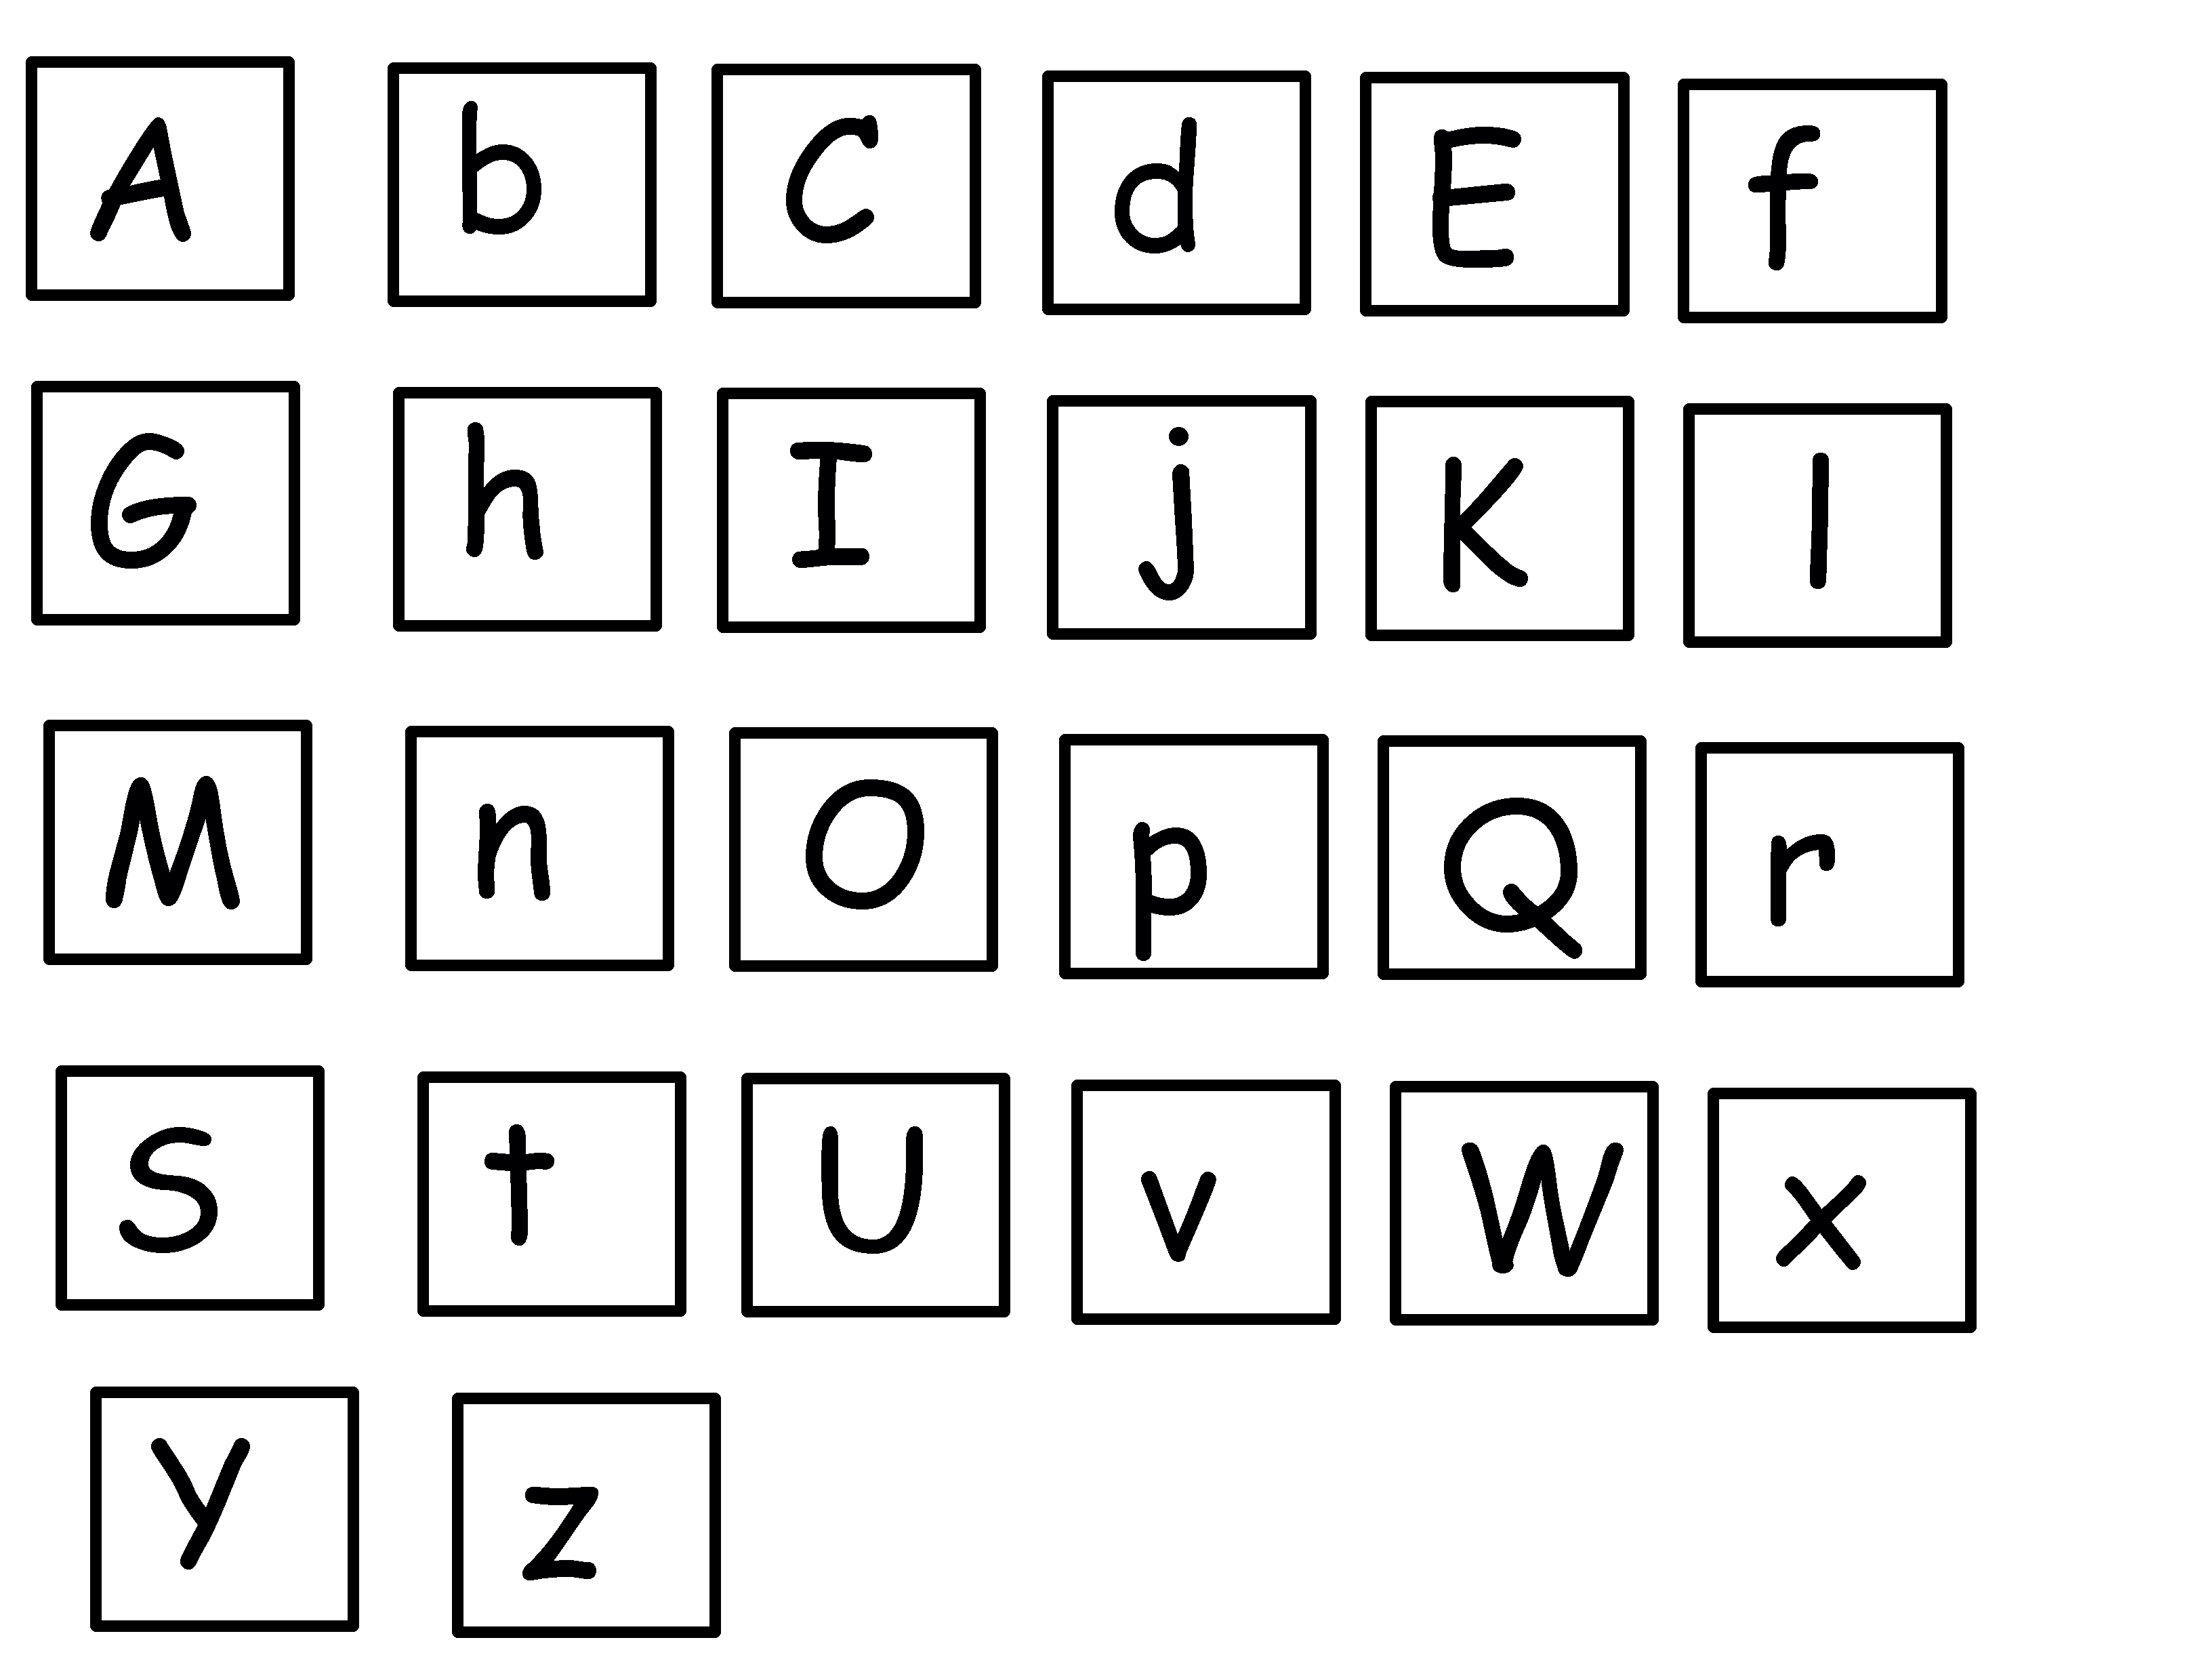 Lowercase Alphabet Letters to Print and Cut Out Image